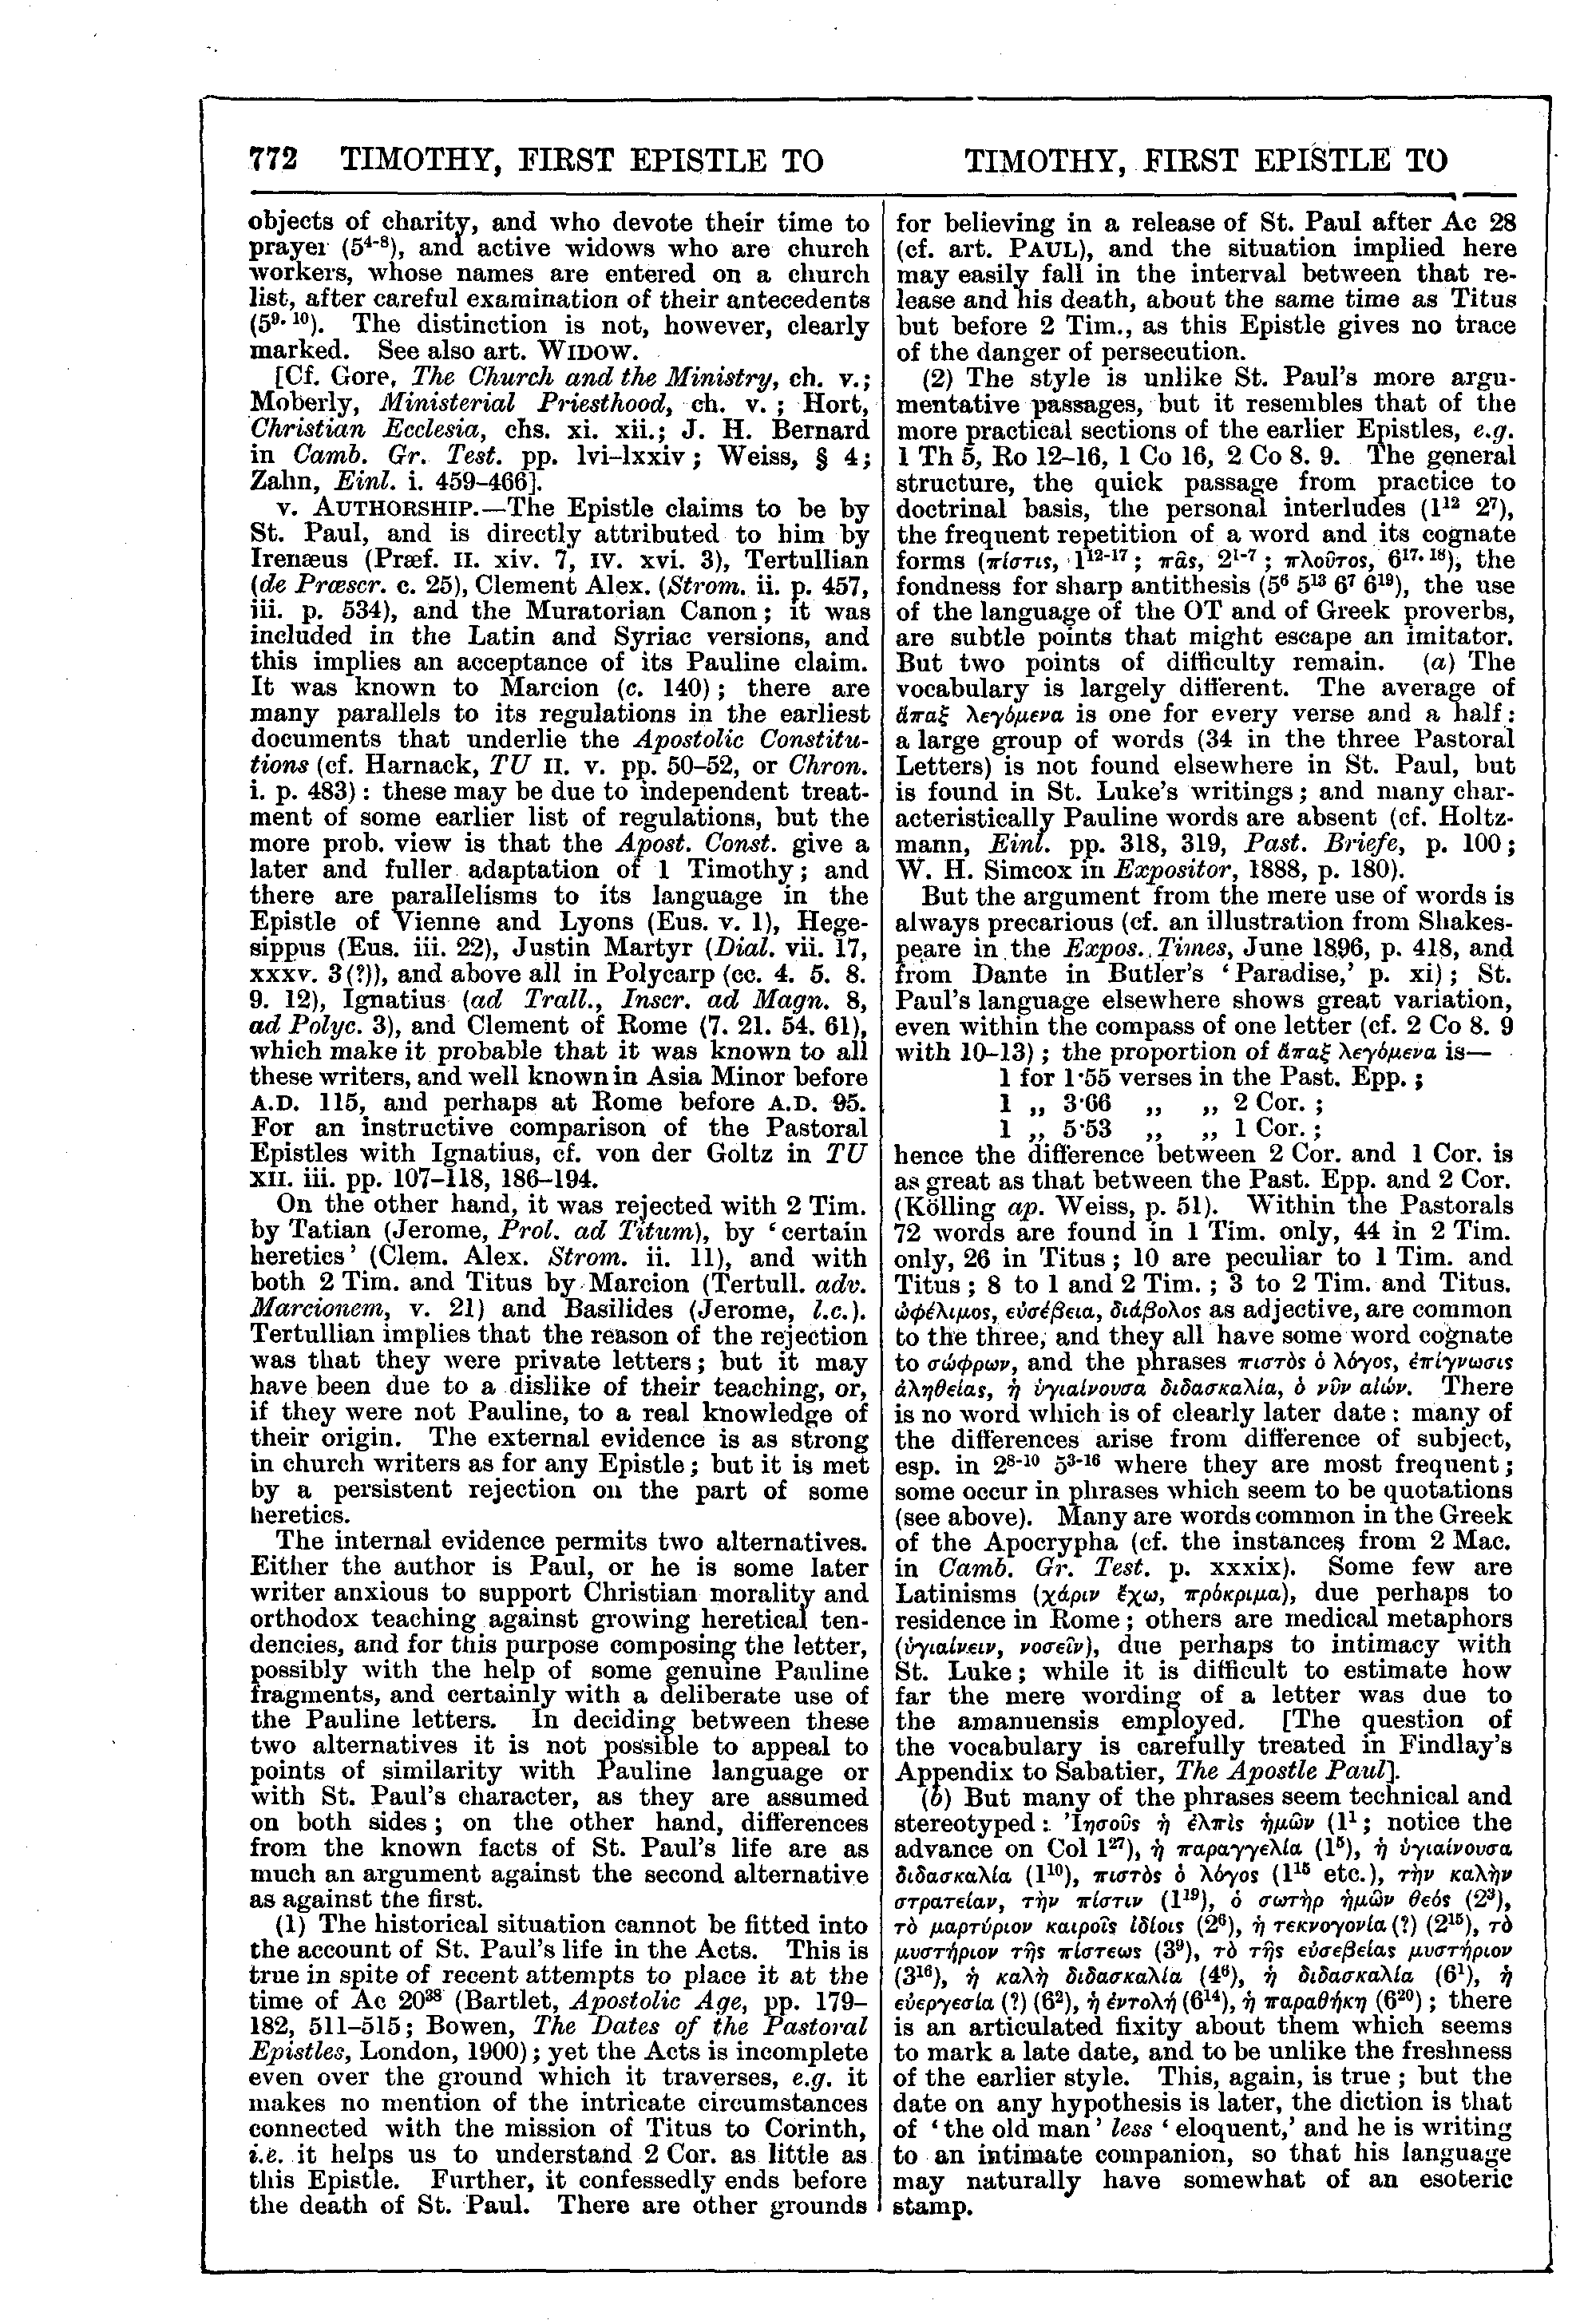 Image of page 772